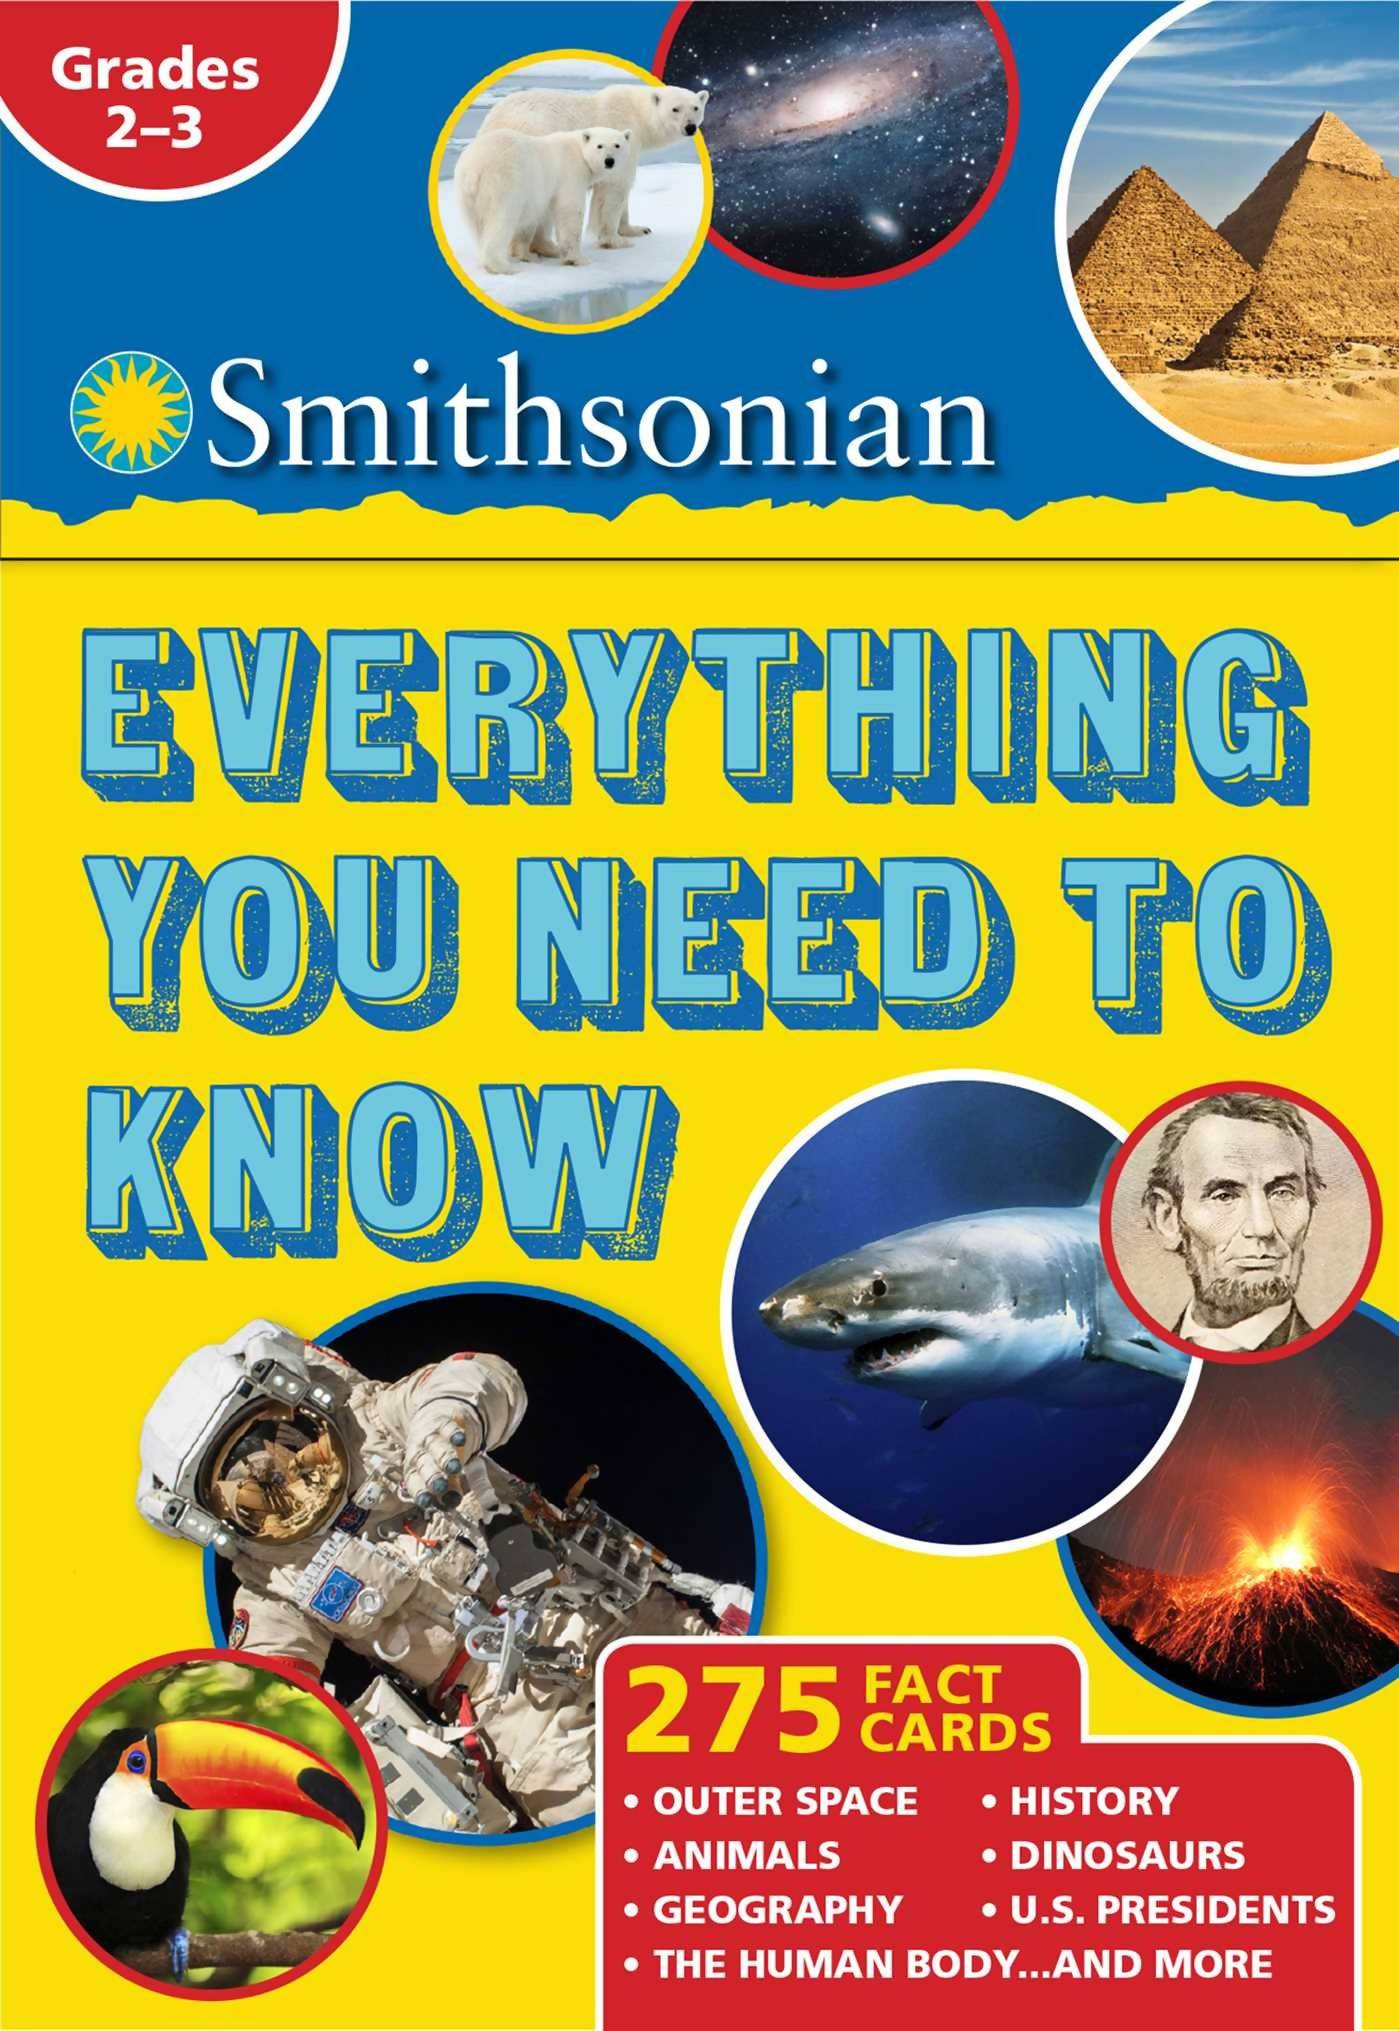 Smithsonian Everything You Need To Know - Grade 2-3